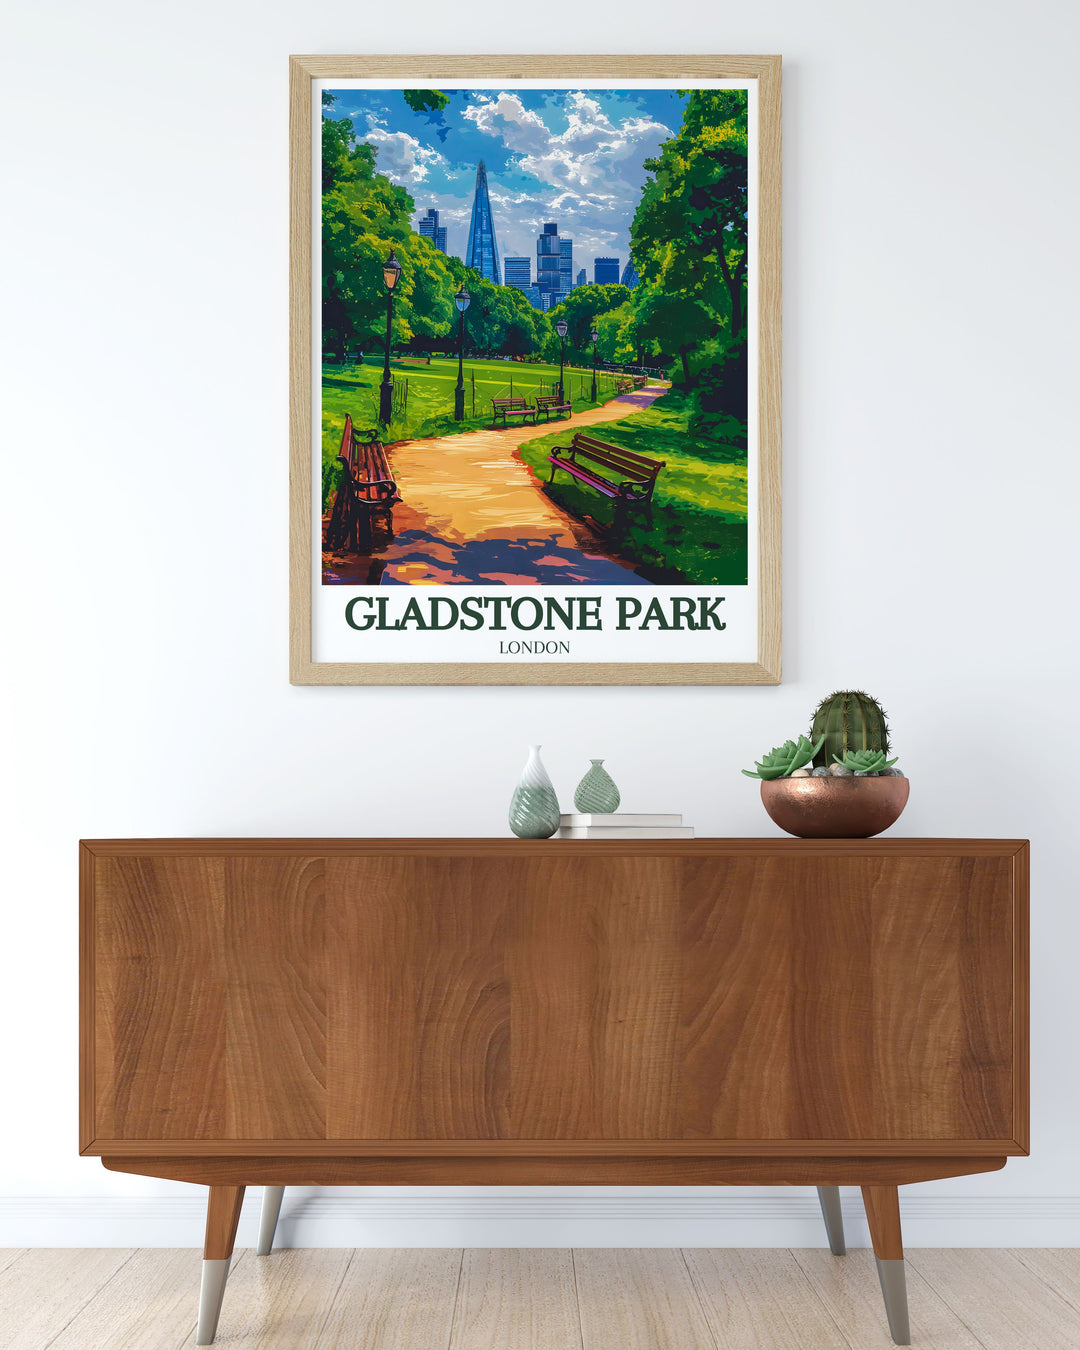 Canvas art of Gladstone Park in Brent, London, depicting well manicured gardens and scenic views, an ideal addition for nature lovers and fans of London parks.